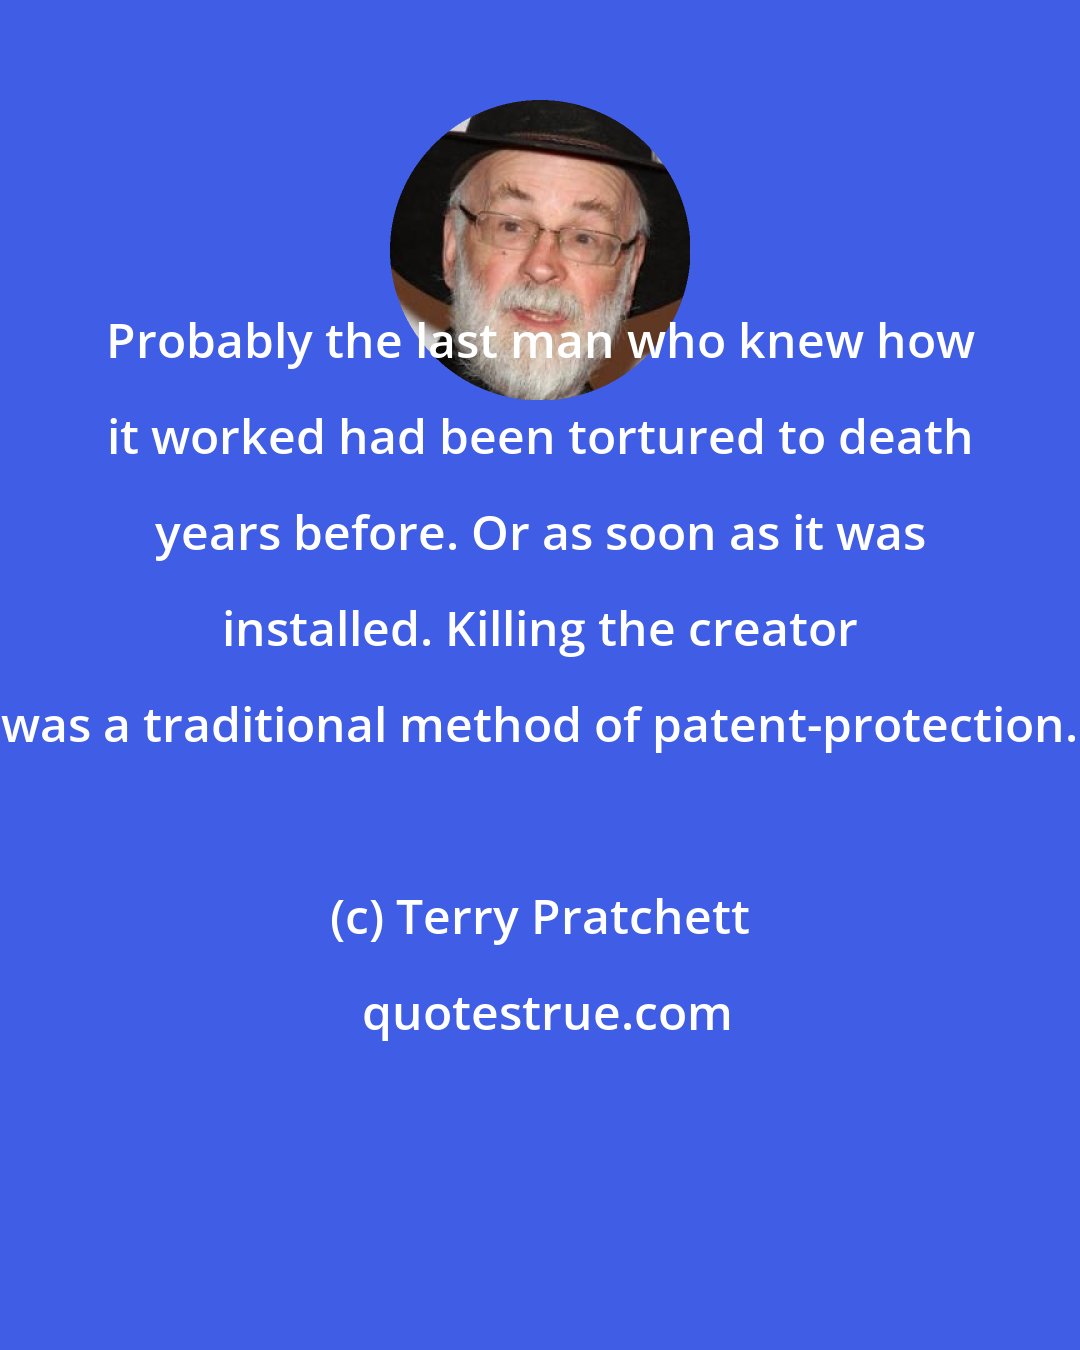 Terry Pratchett: Probably the last man who knew how it worked had been tortured to death years before. Or as soon as it was installed. Killing the creator was a traditional method of patent-protection.